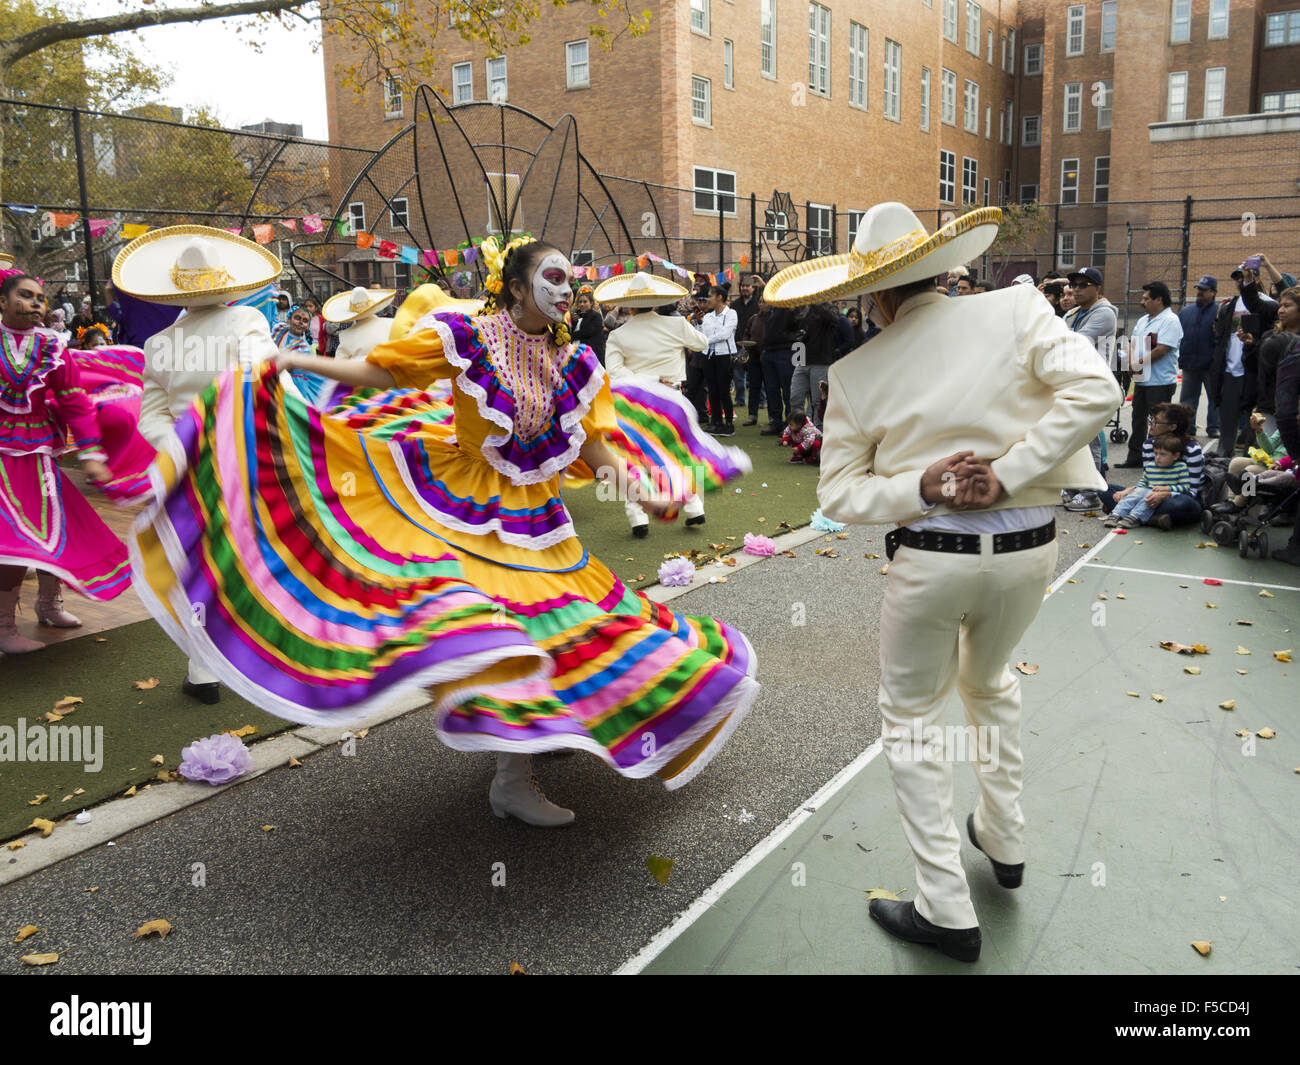 Folkloric dancers at Day of the Dead Festival in the Kensington section of Brooklyn, NY, Nov.1, 2015. Stock Photo